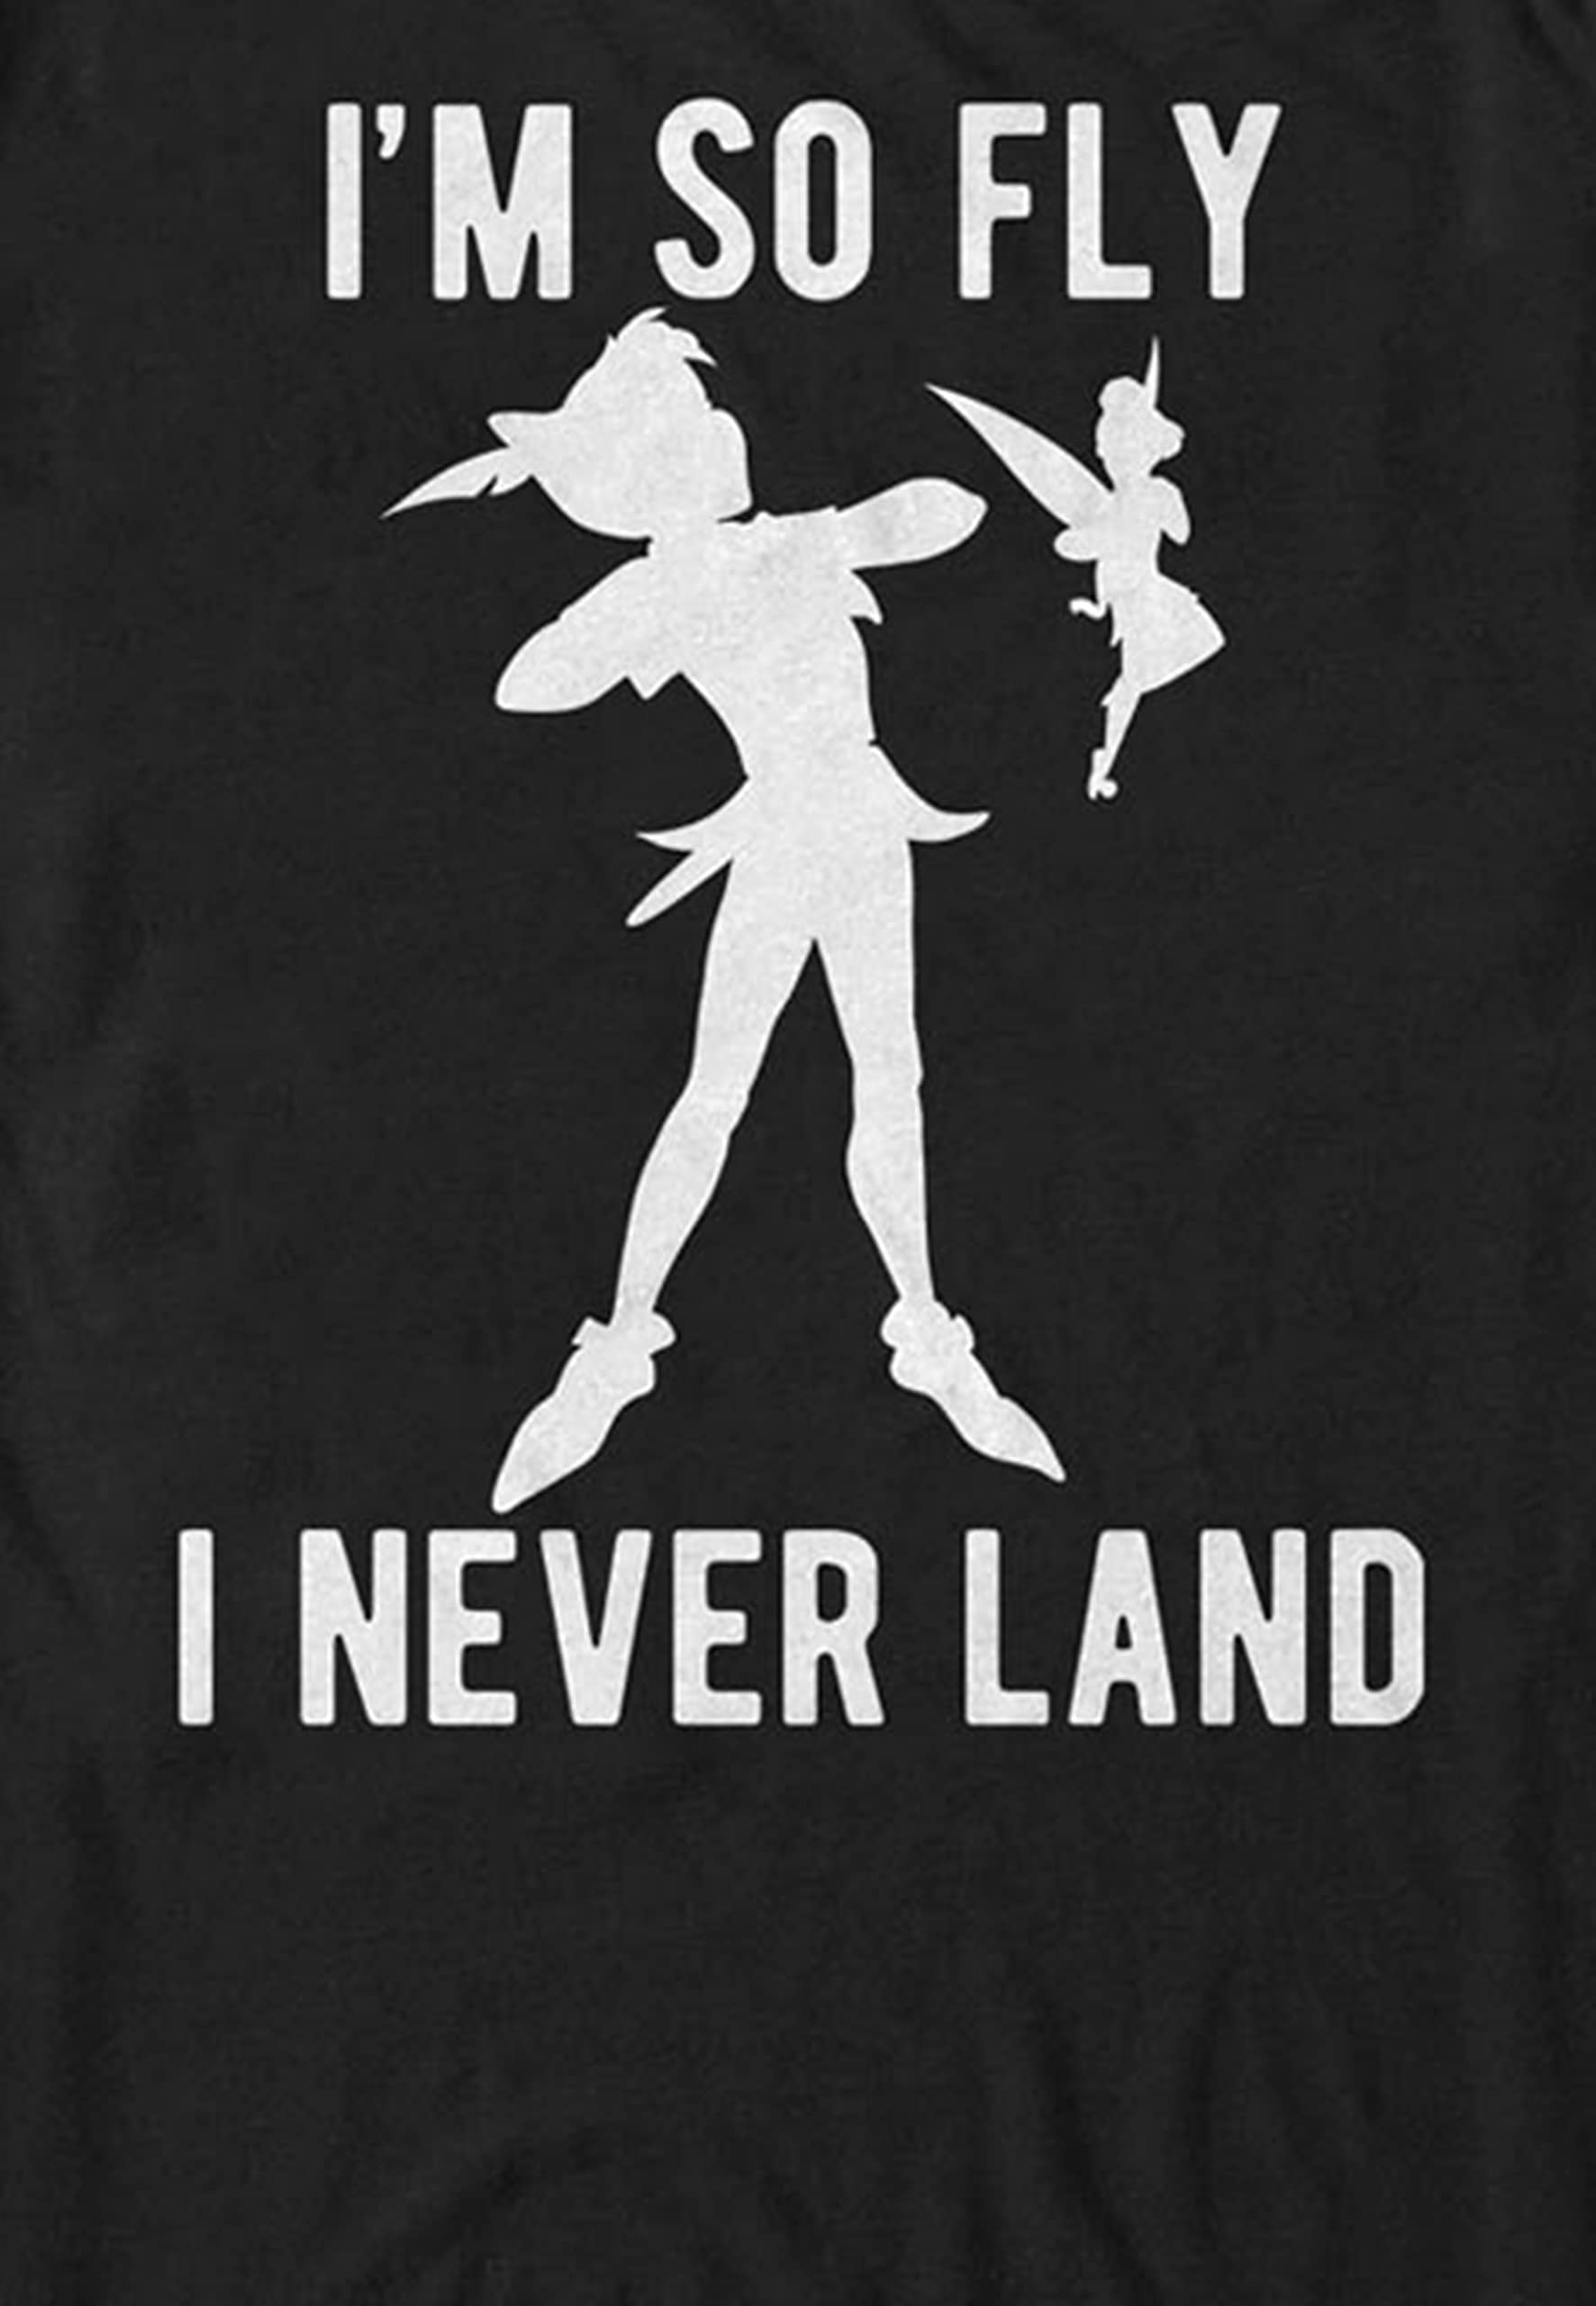 Disney Peter Pan Tinkerbell I'm So Fly I Neverland Graphic T-Shirt